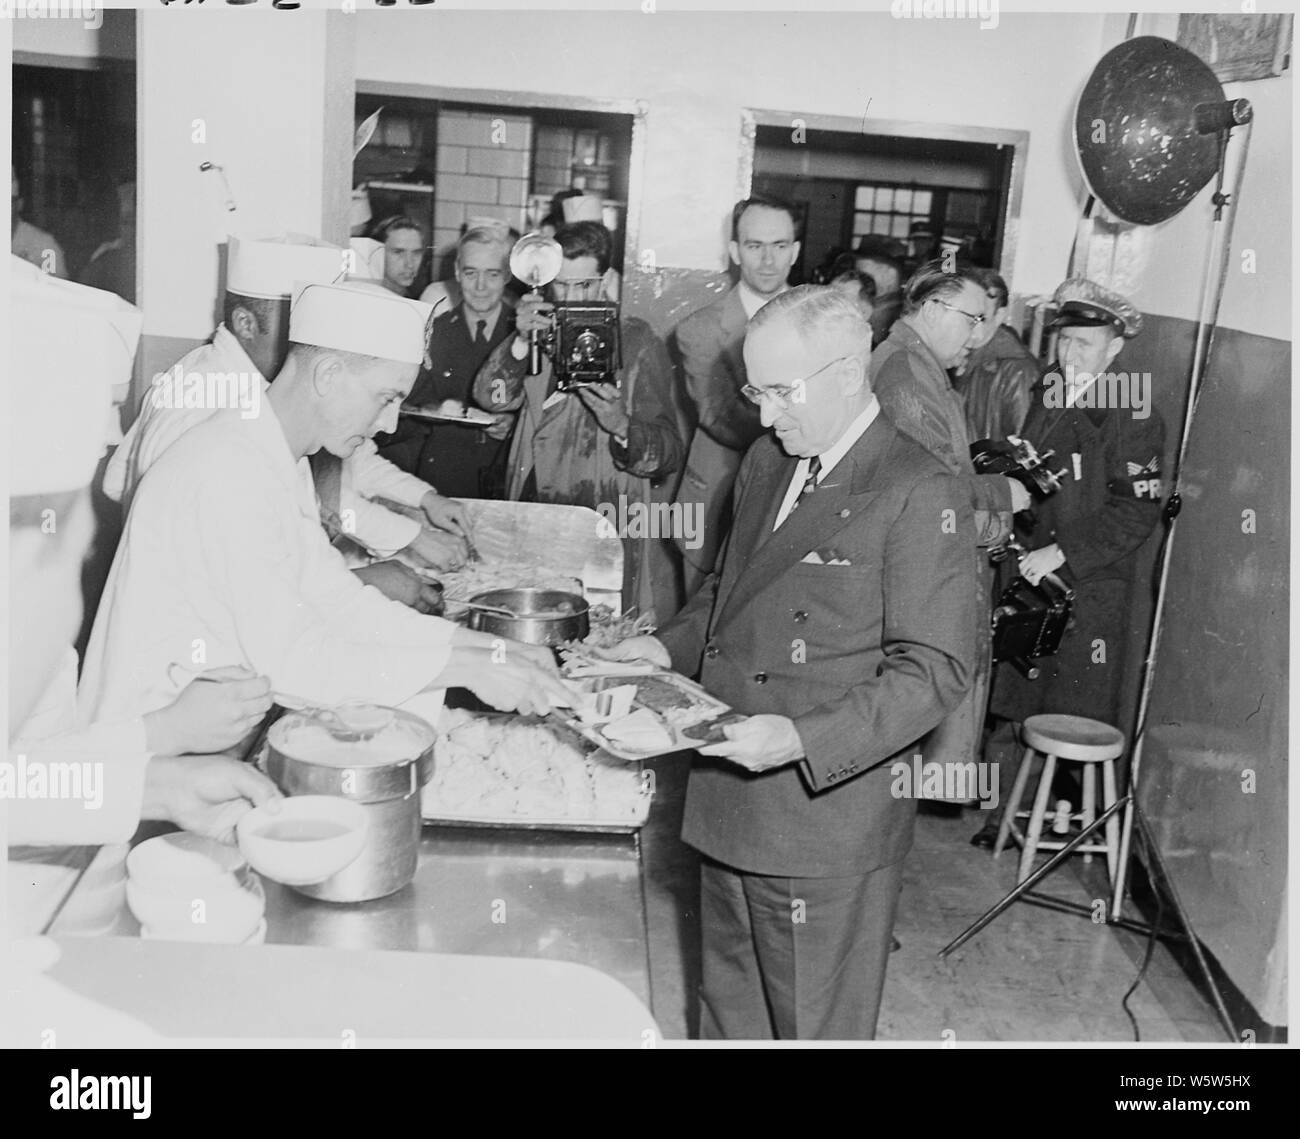 Photograph of President Truman holding his tray in the chow line at the mess hall, during his visit to Aberdeen Proving Ground in Maryland. Stock Photo